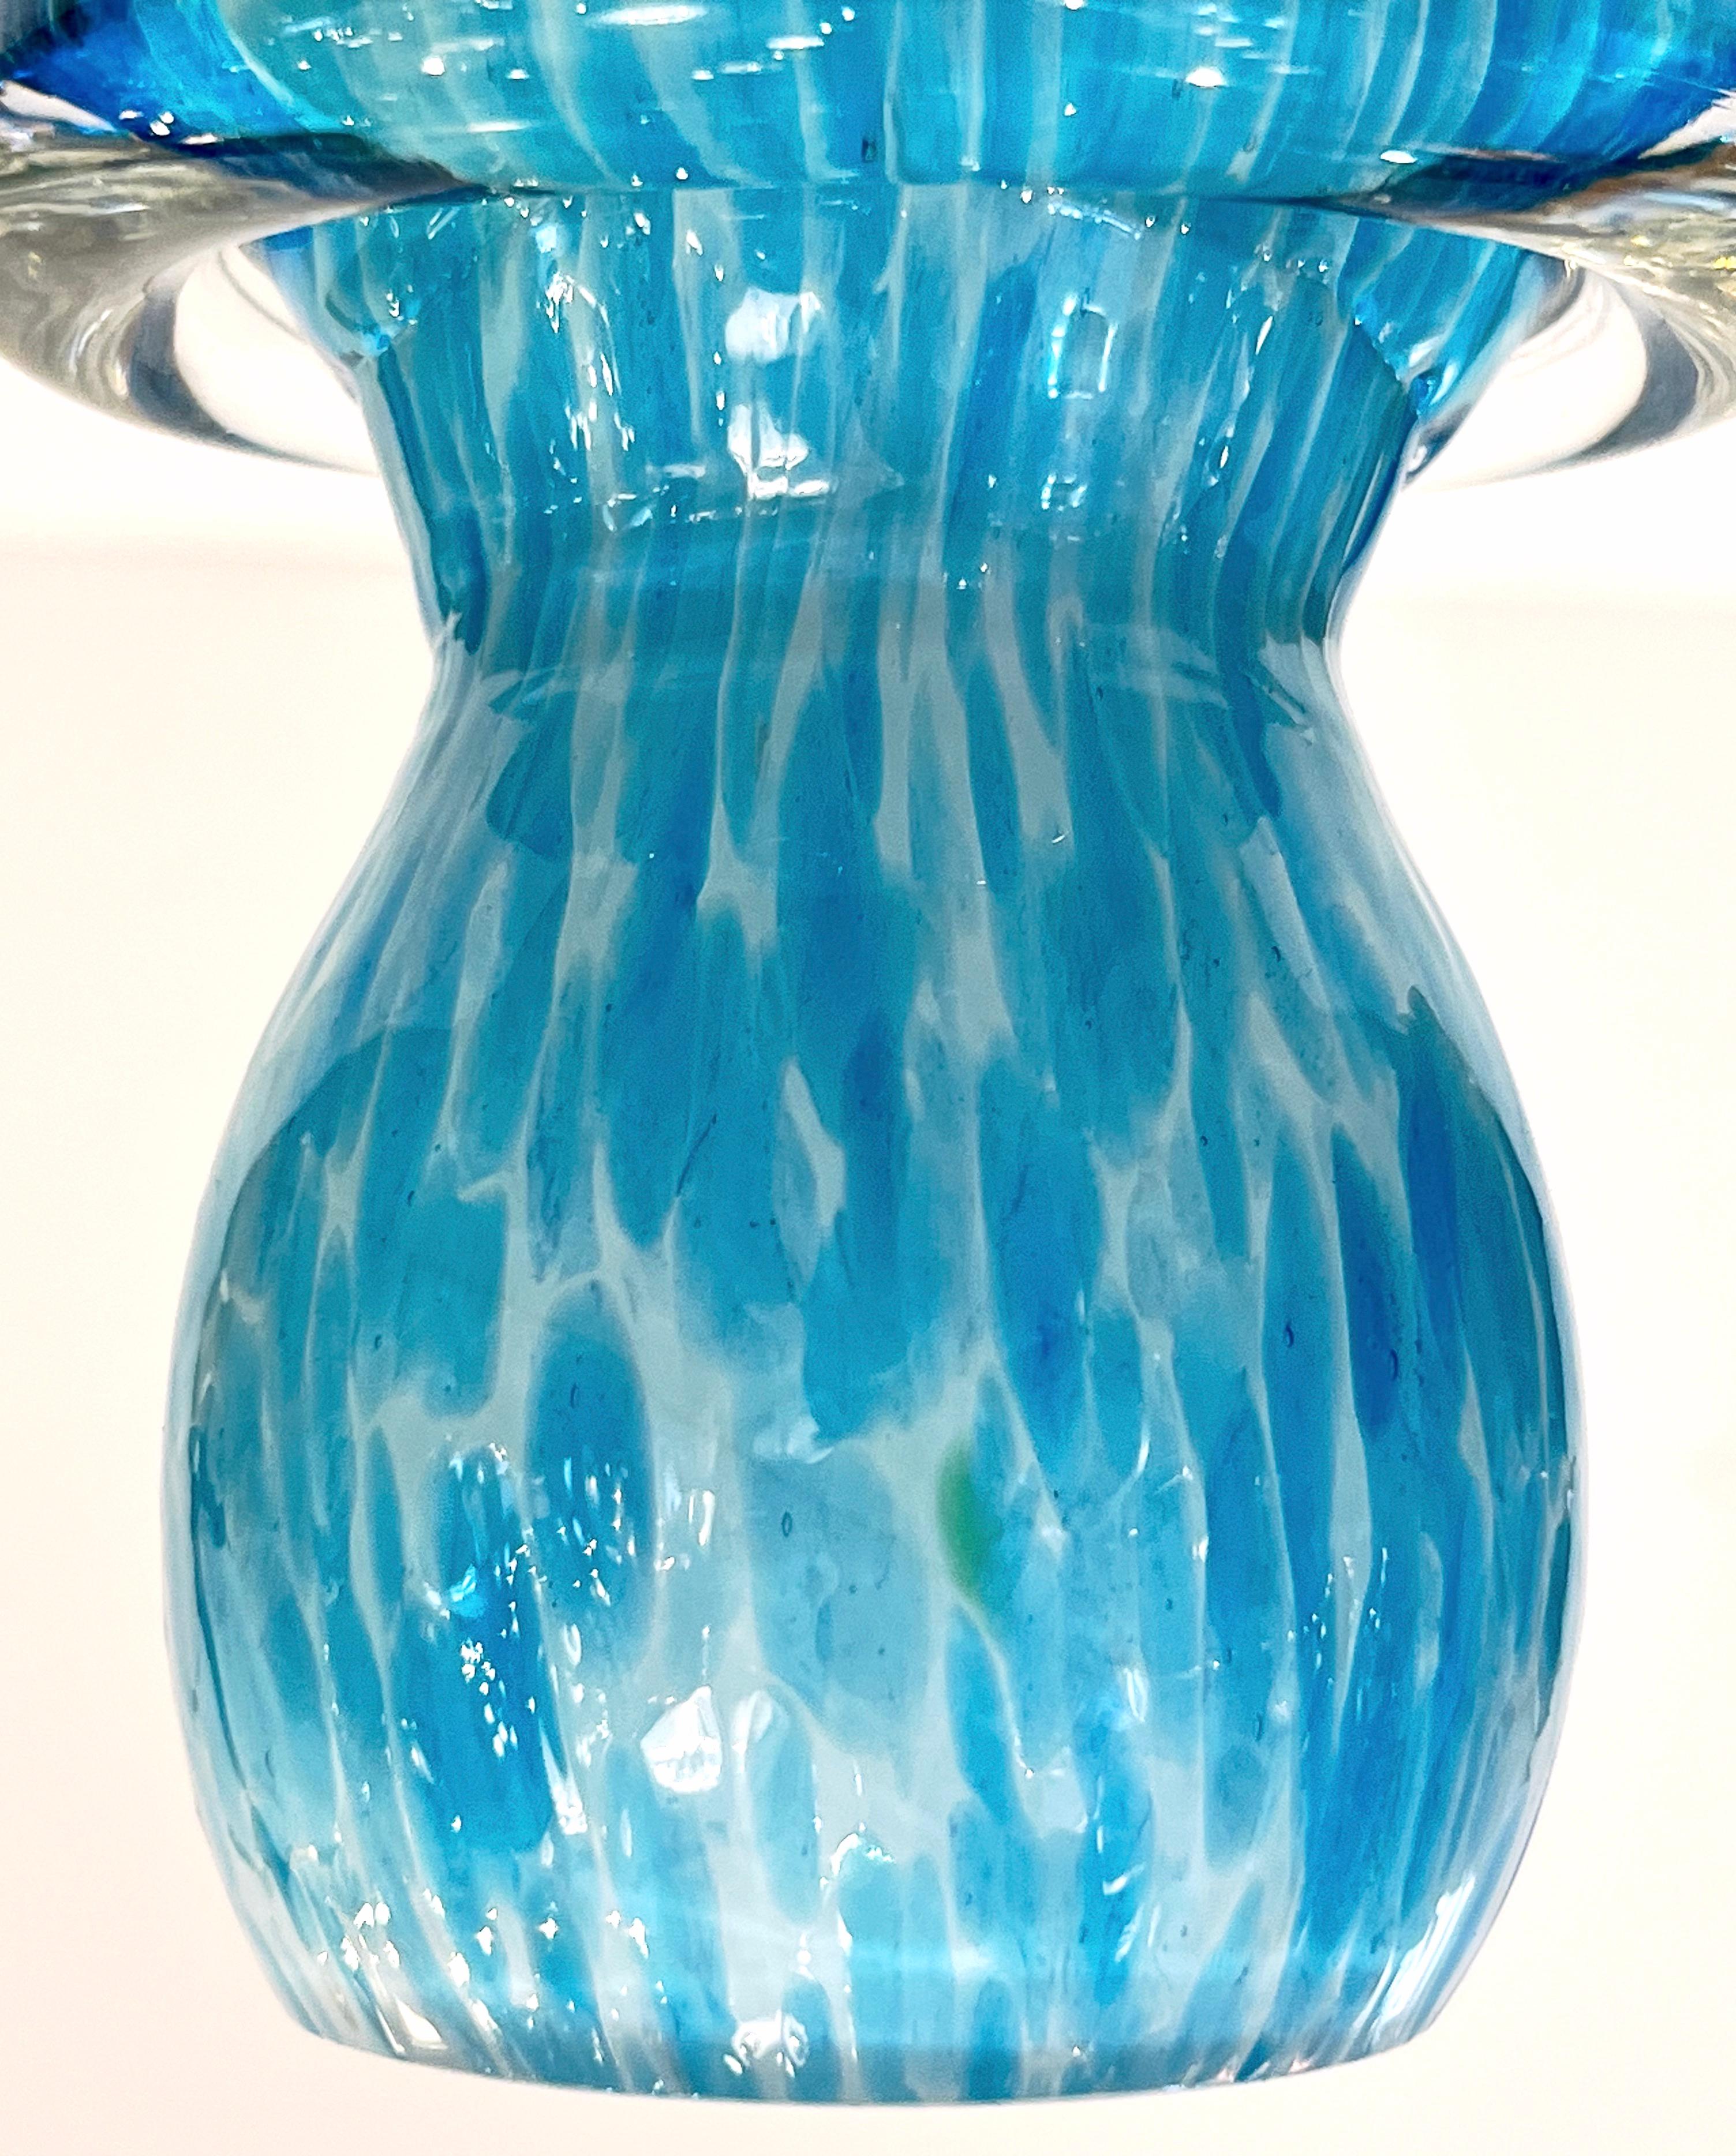 Formia 1980s Italian Vintage Turquoise Blue & White Murano Glass Tree Sculpture For Sale 3